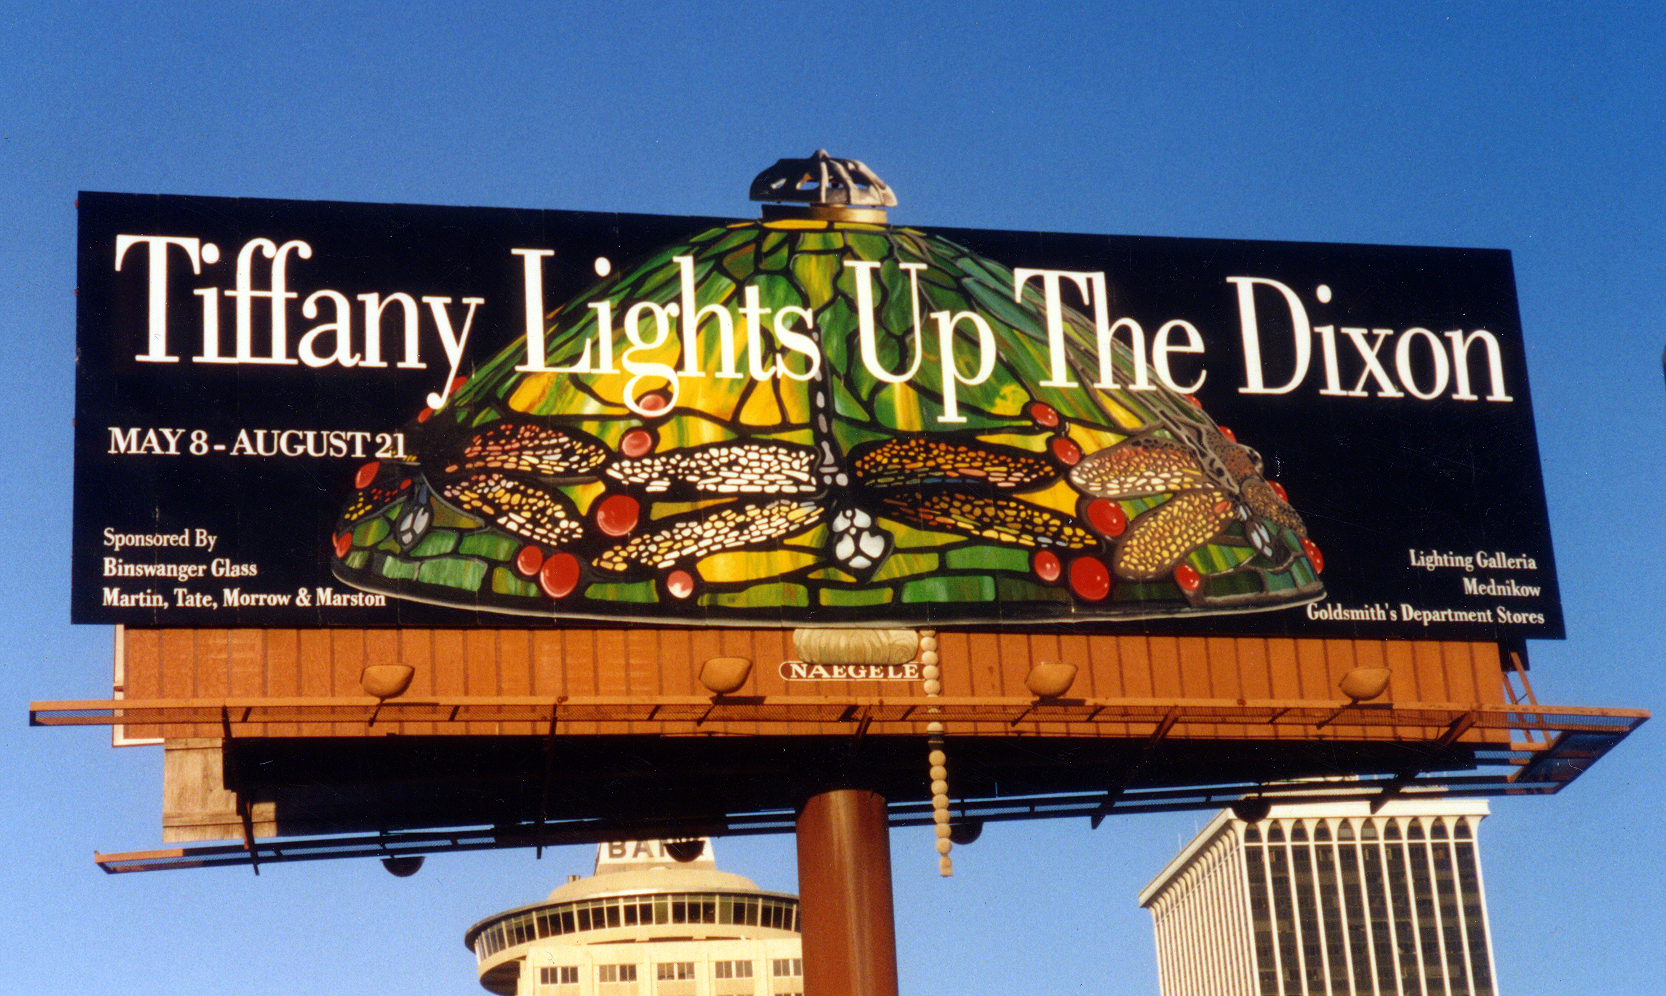  Dixon Gallery &amp; Gardens “Tiffany Lights Up The Dixon” outdoor  Branding creative, copywriting and design by Chuck Mitchell 